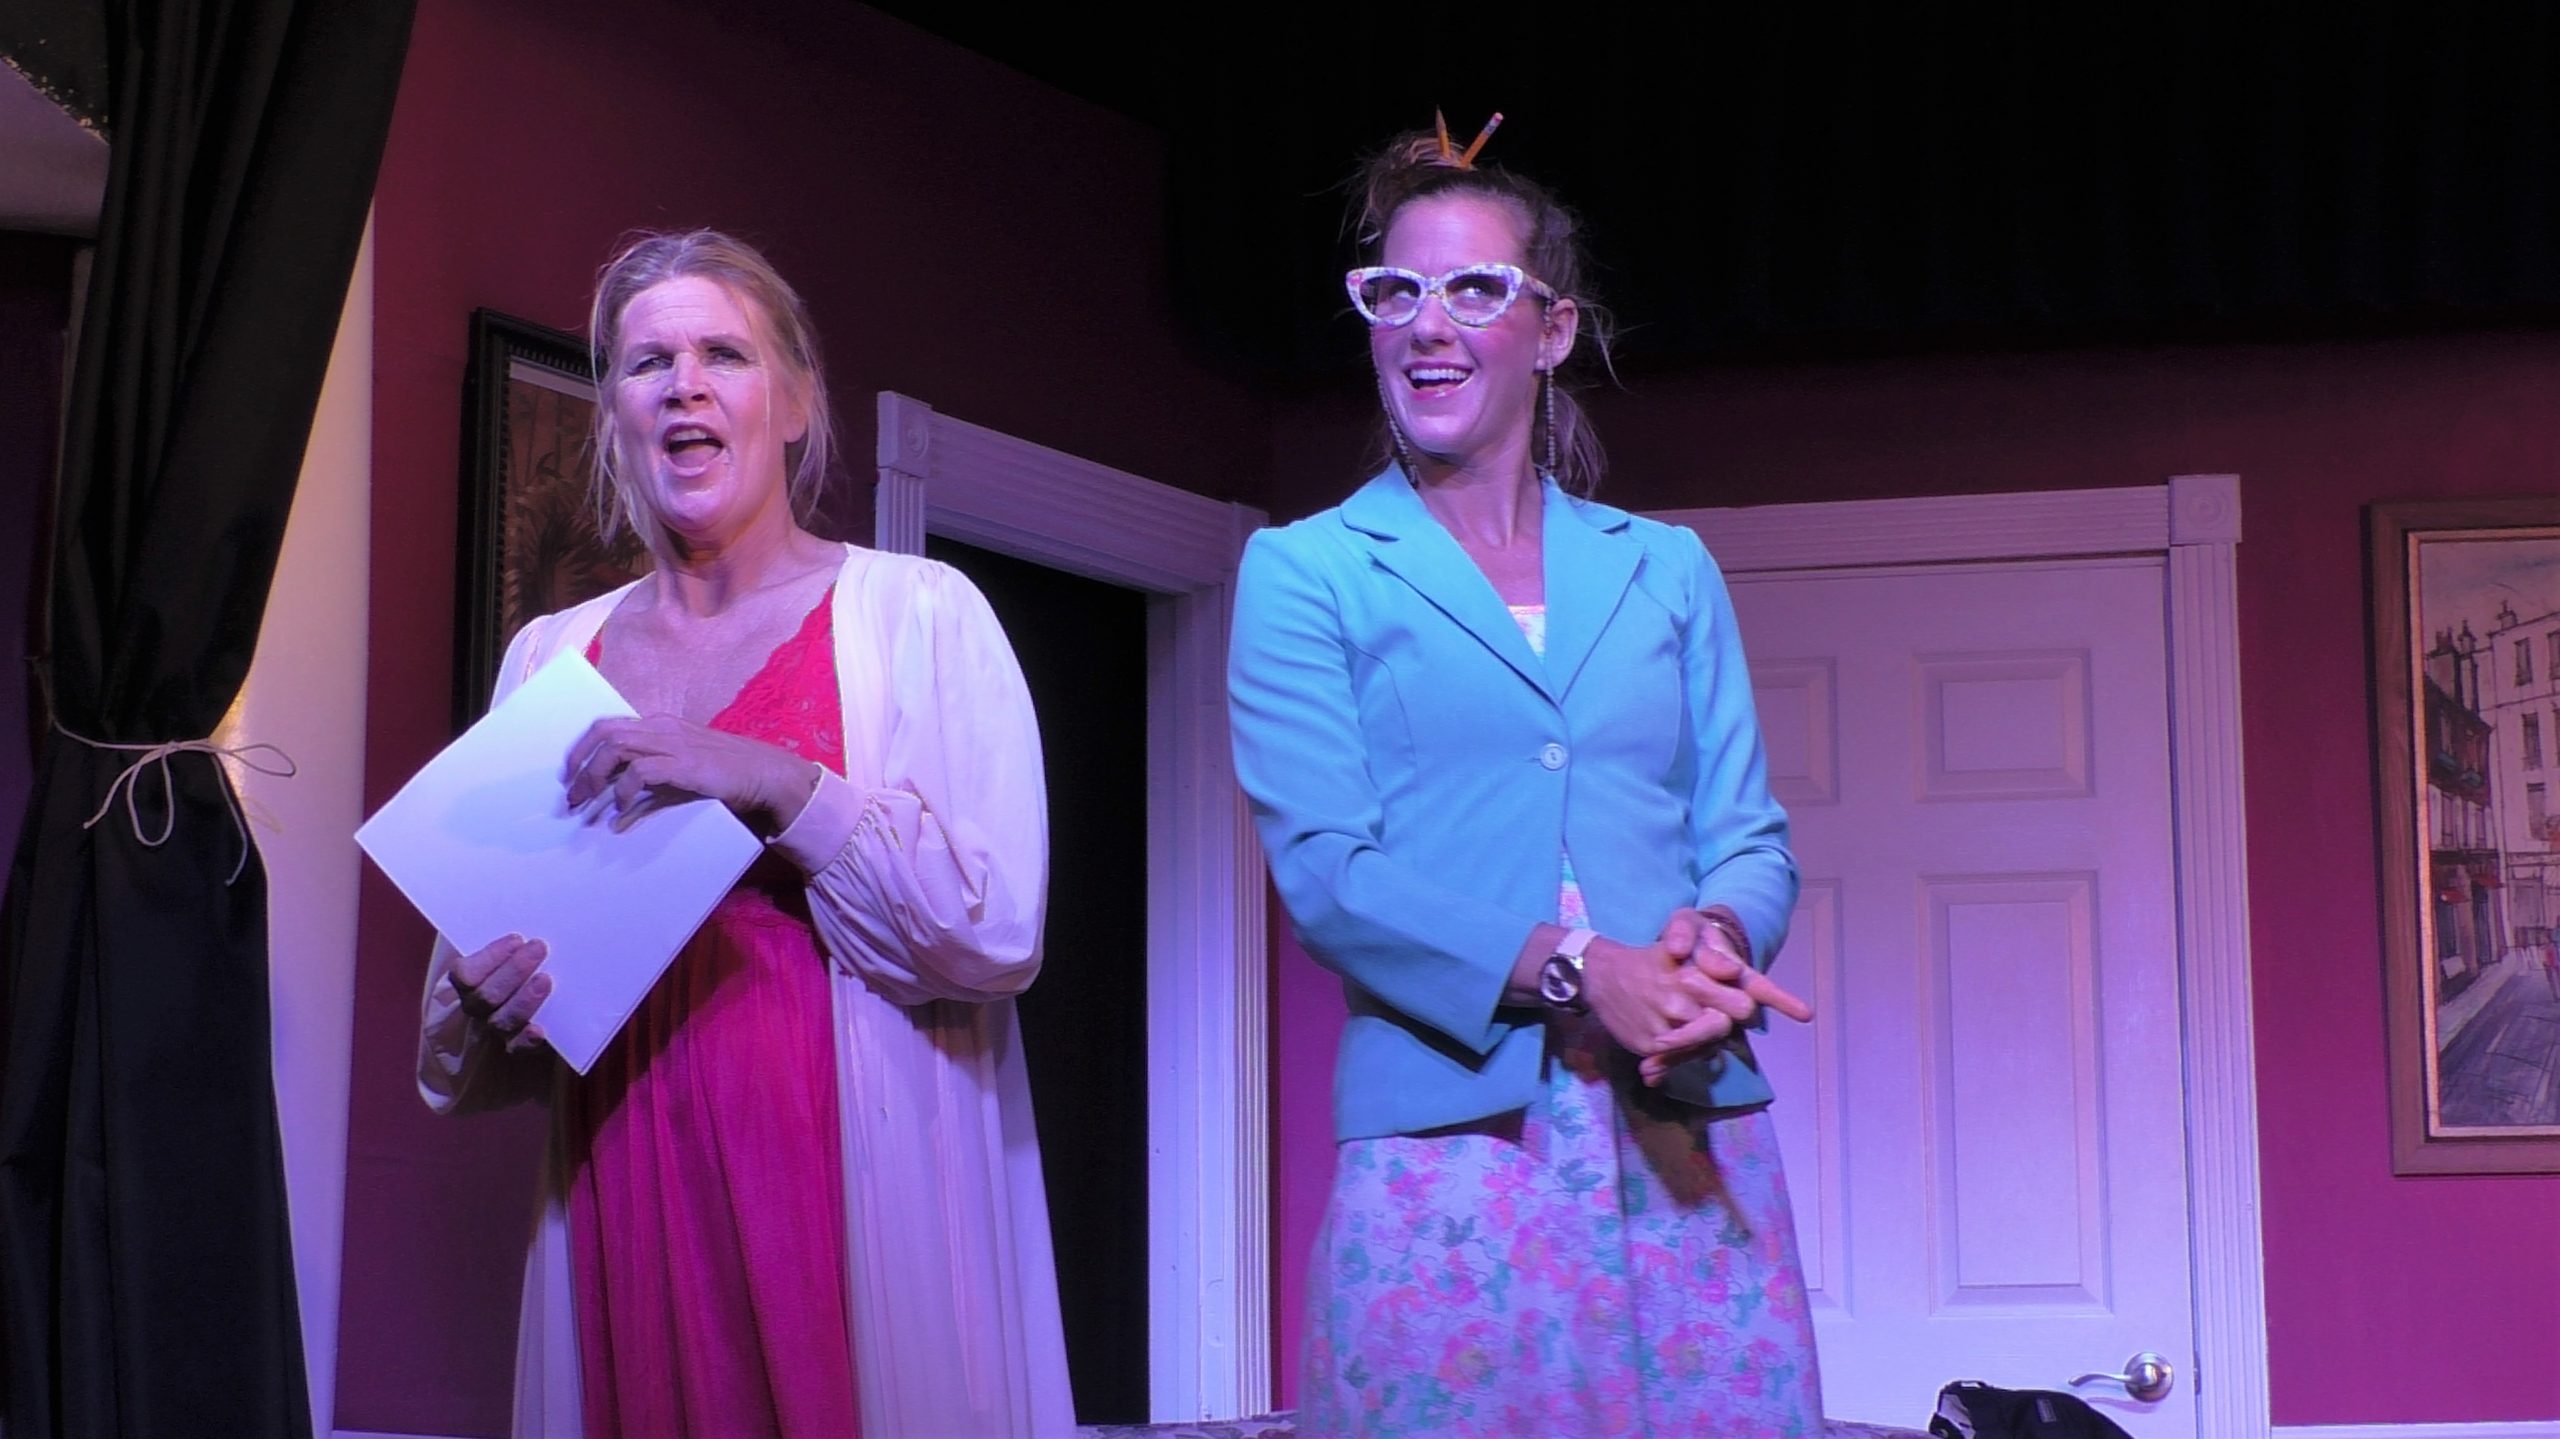 A female actor wears a pink robe and interacts with a female actor who wears a floral skit, green jacket, and large white glasses